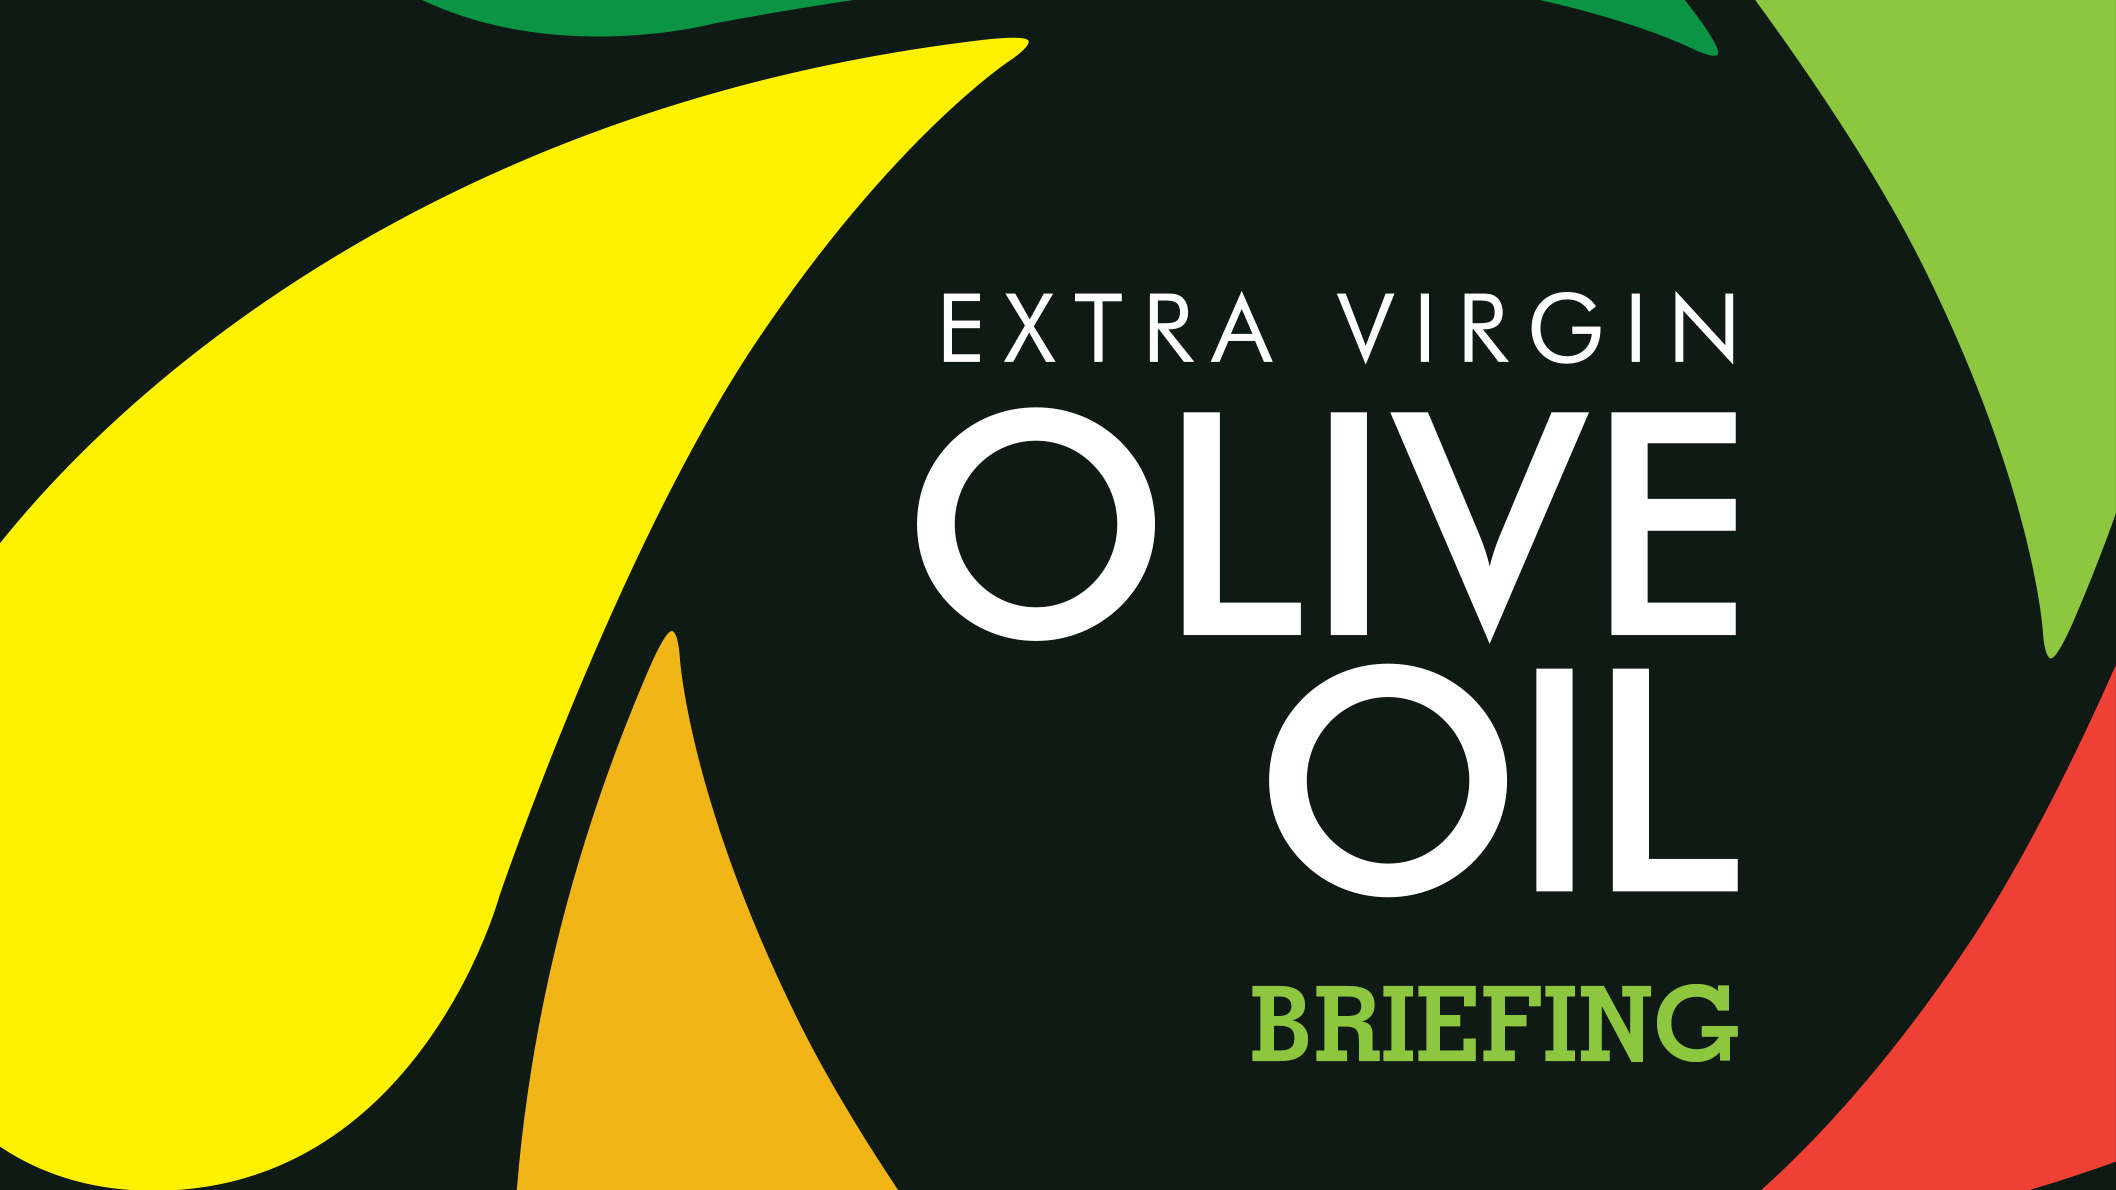 THE BRIEFING: Extra Virgin Olive Oil